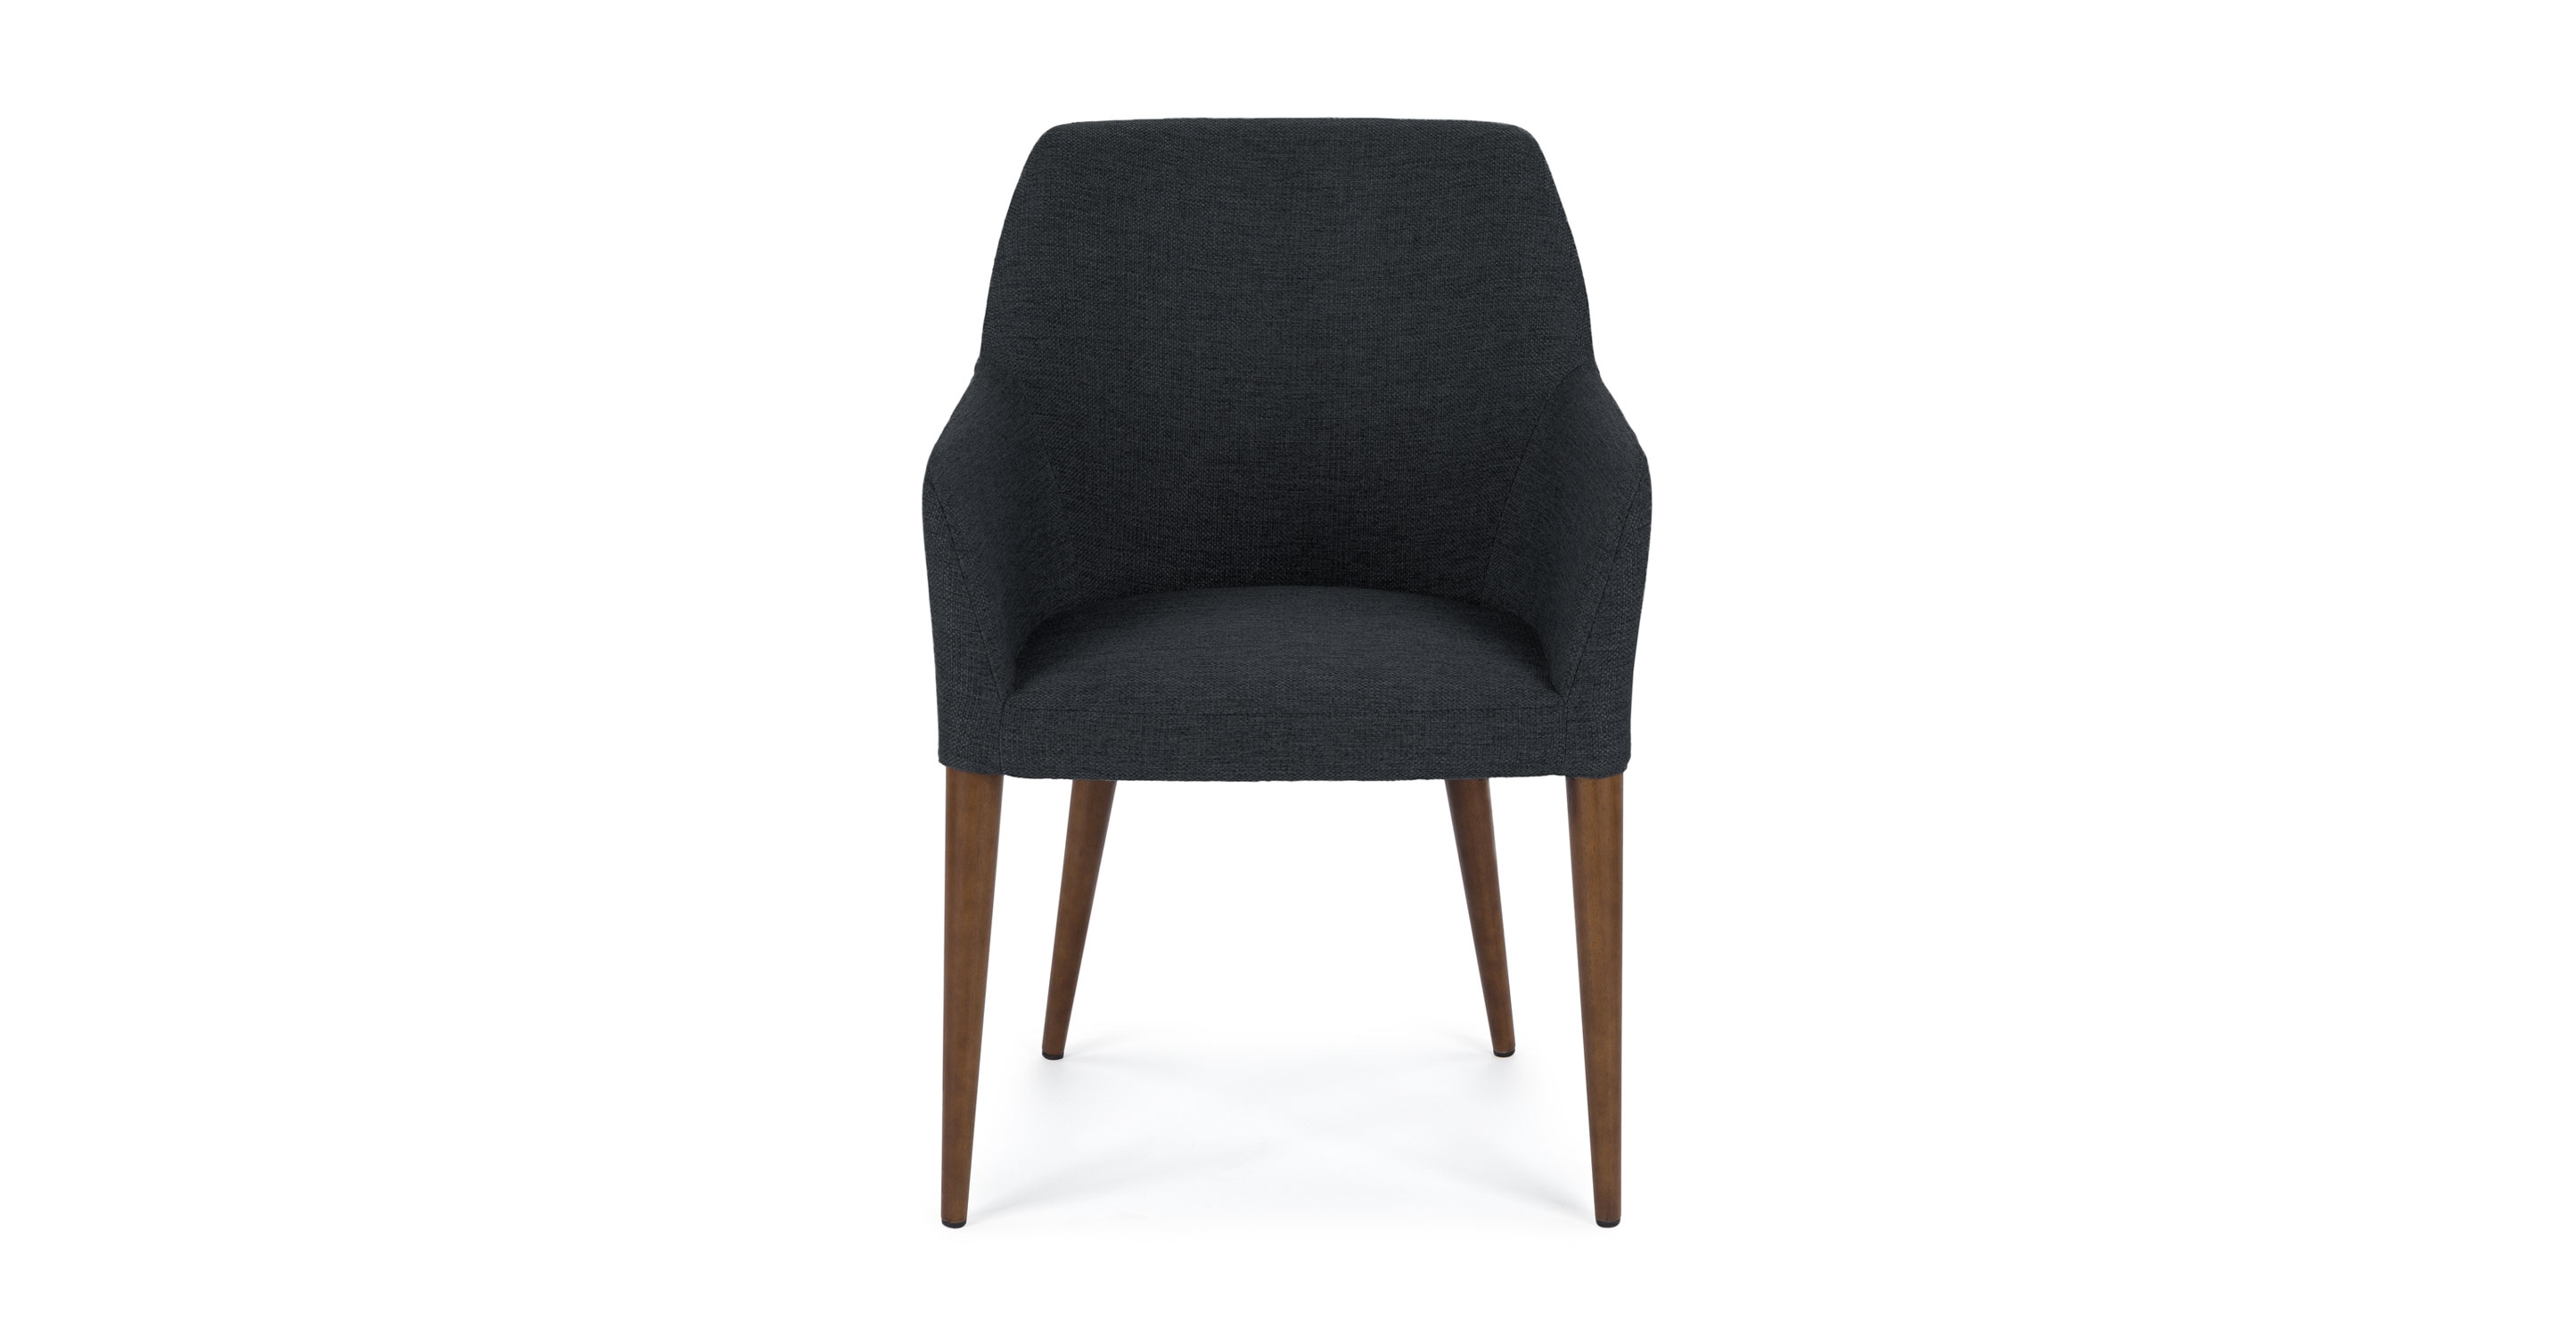 Feast Bard Gray Dining Chair - Image 1